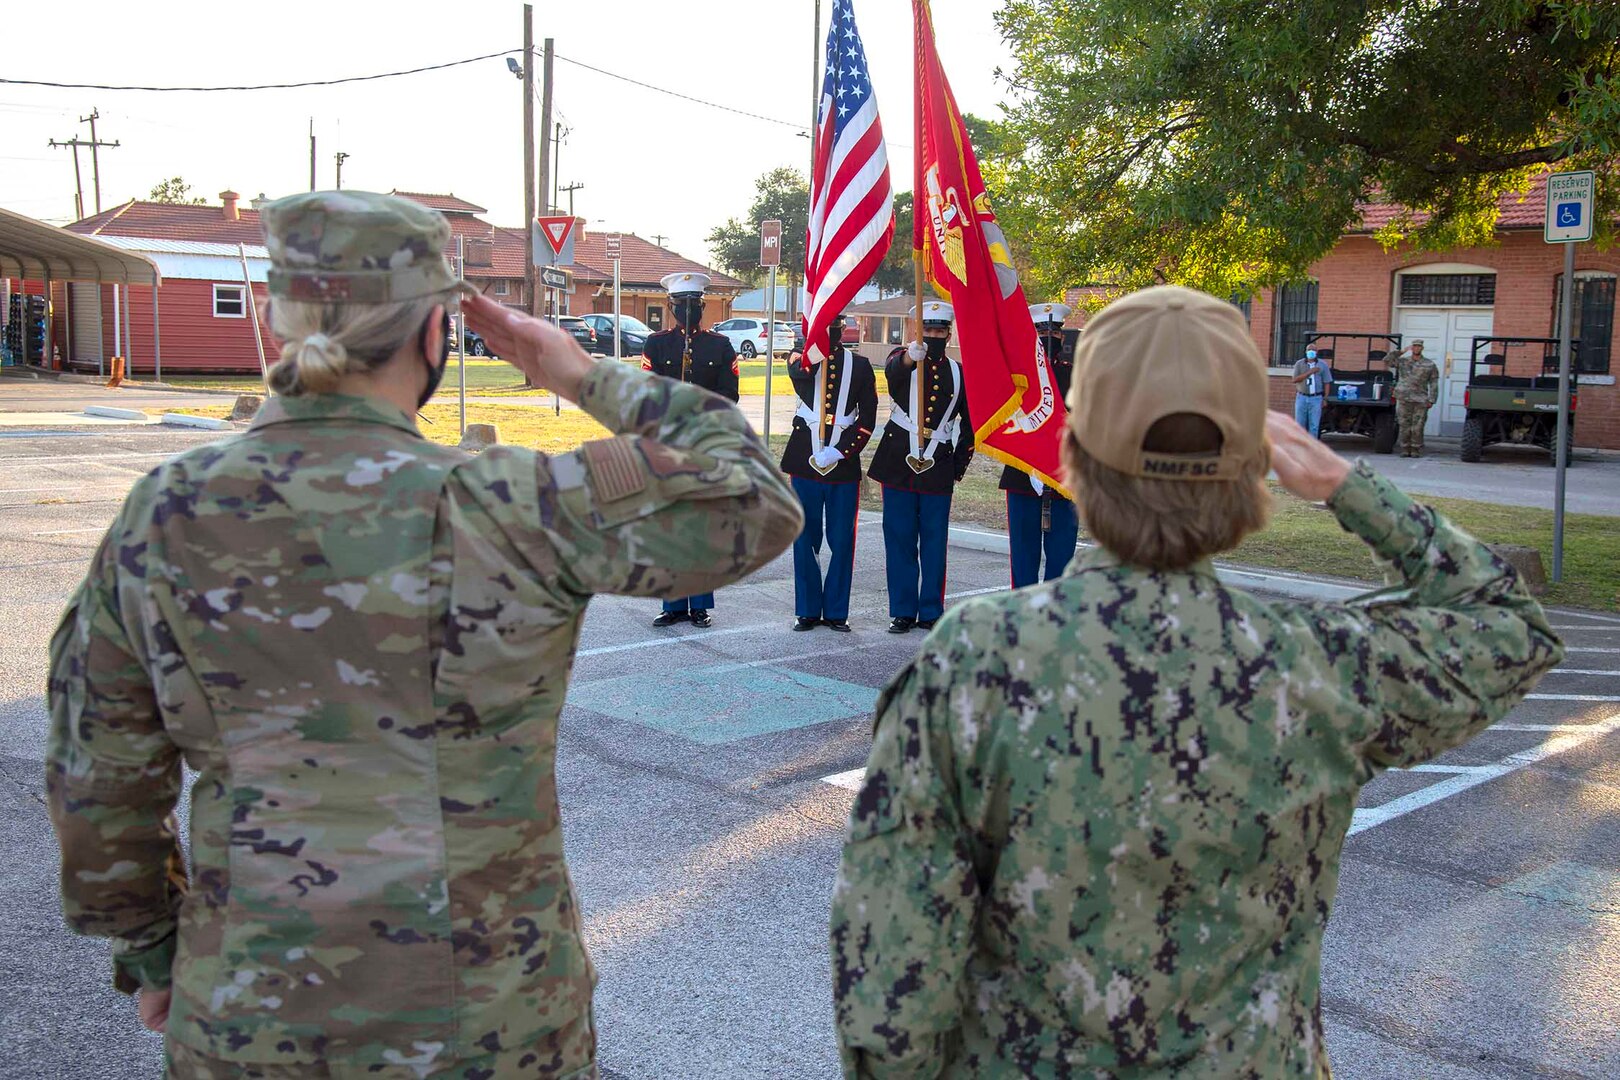 Brig. Gen. Caroline Miller (left), JBSA and 502nd Air Base Wing commander, and Rear Adm. Cynthia Kuehner (right), Navy Medicine Education, Training & Logistics Command commander, render salutes at the start of the National Night Out ceremony at JBSA-Fort Sam Houston Oct. 6.